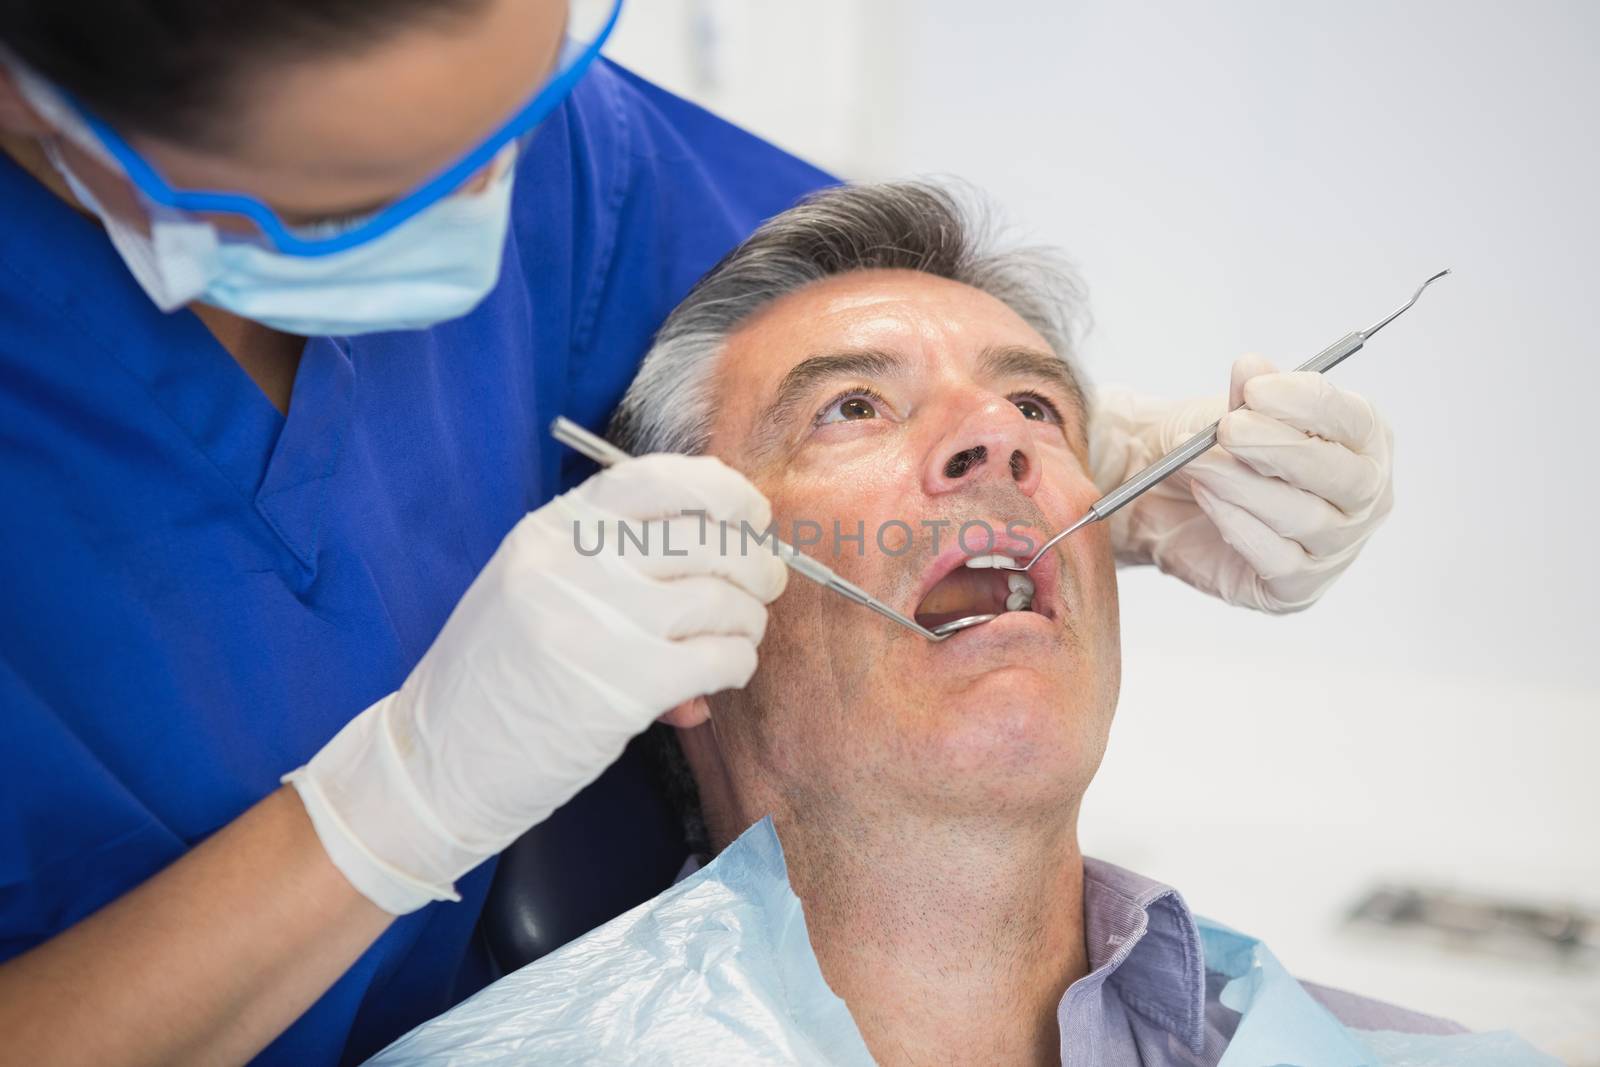 Dentist examining a patient with tools by Wavebreakmedia